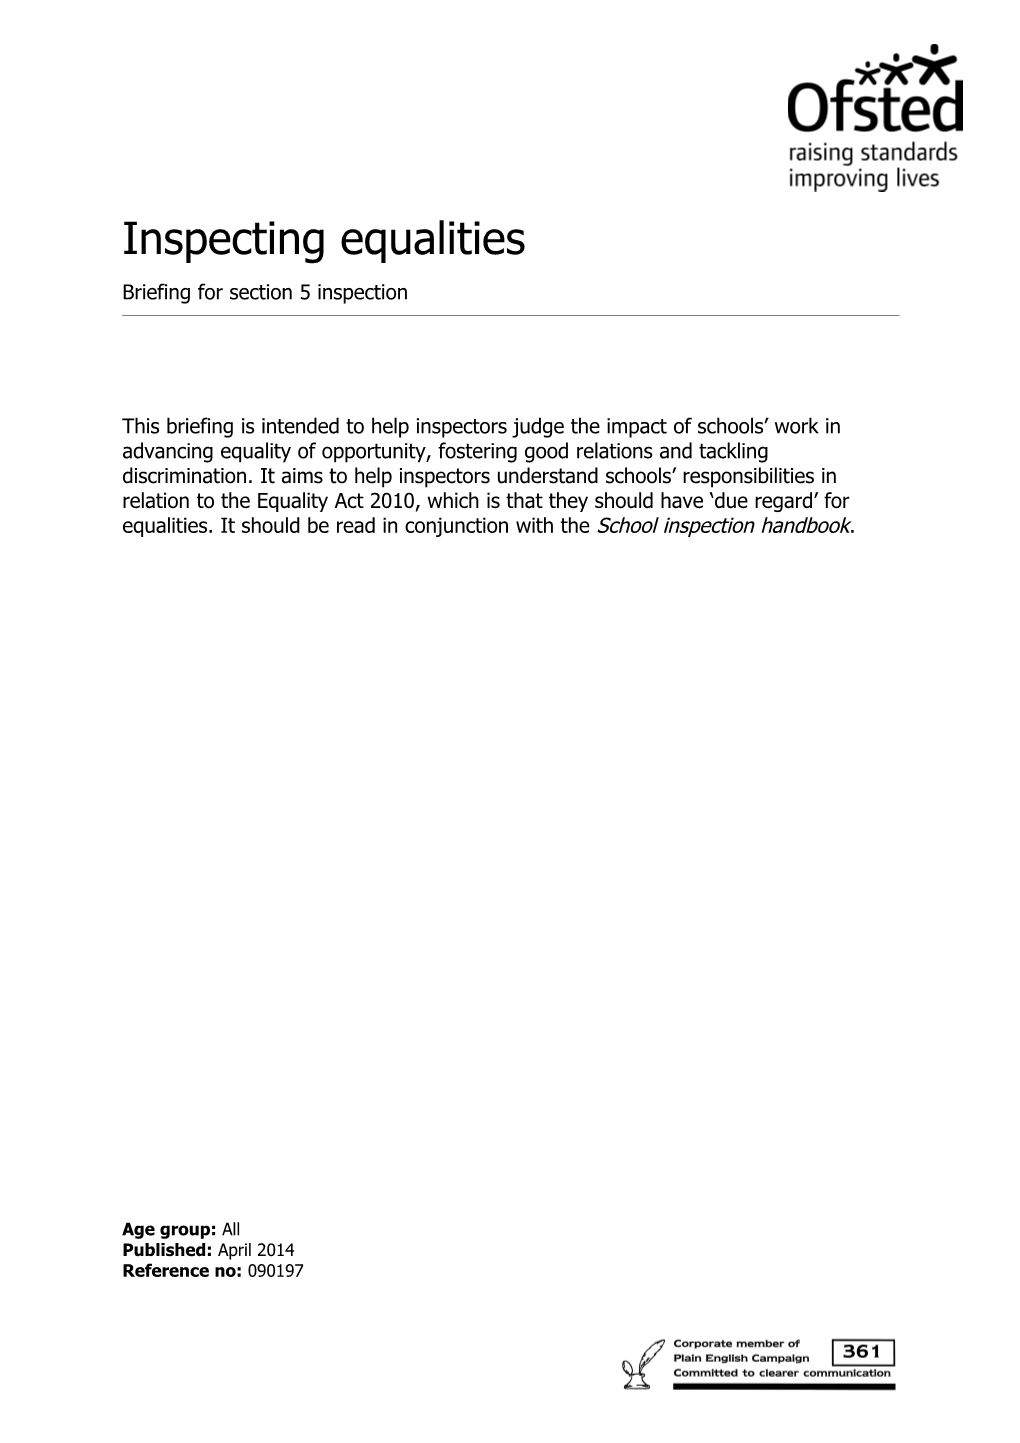 Inspecting Equalities Briefing